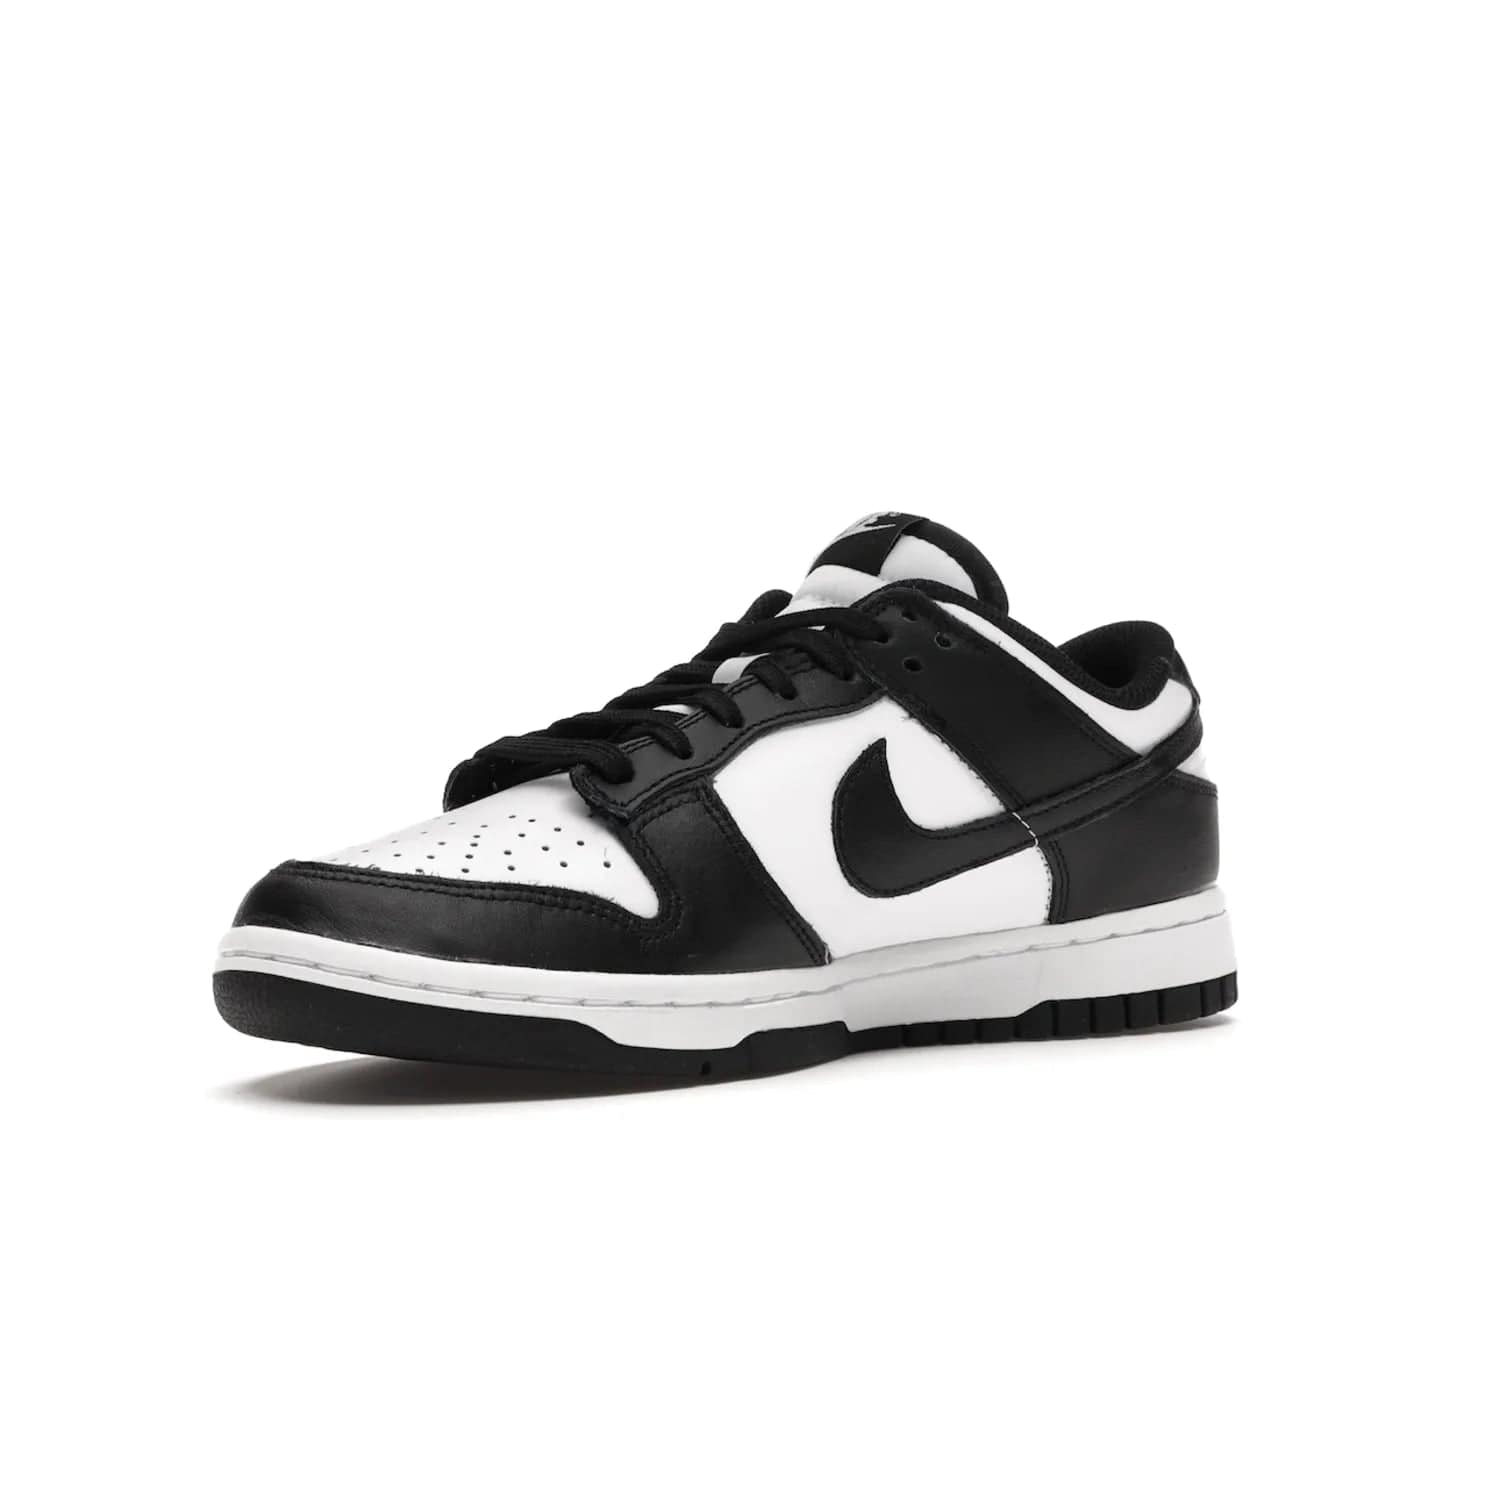 Nike Dunk Low Retro White Black Panda (2021) (Women's) - Image 15 - Only at www.BallersClubKickz.com - Say hello to the new Nike Dunk Low Retro White Black Panda (2021) (Women's)! White & black leather upper with Nike Swoosh logo. Get your pair for $100 in March 2021! Shop now!